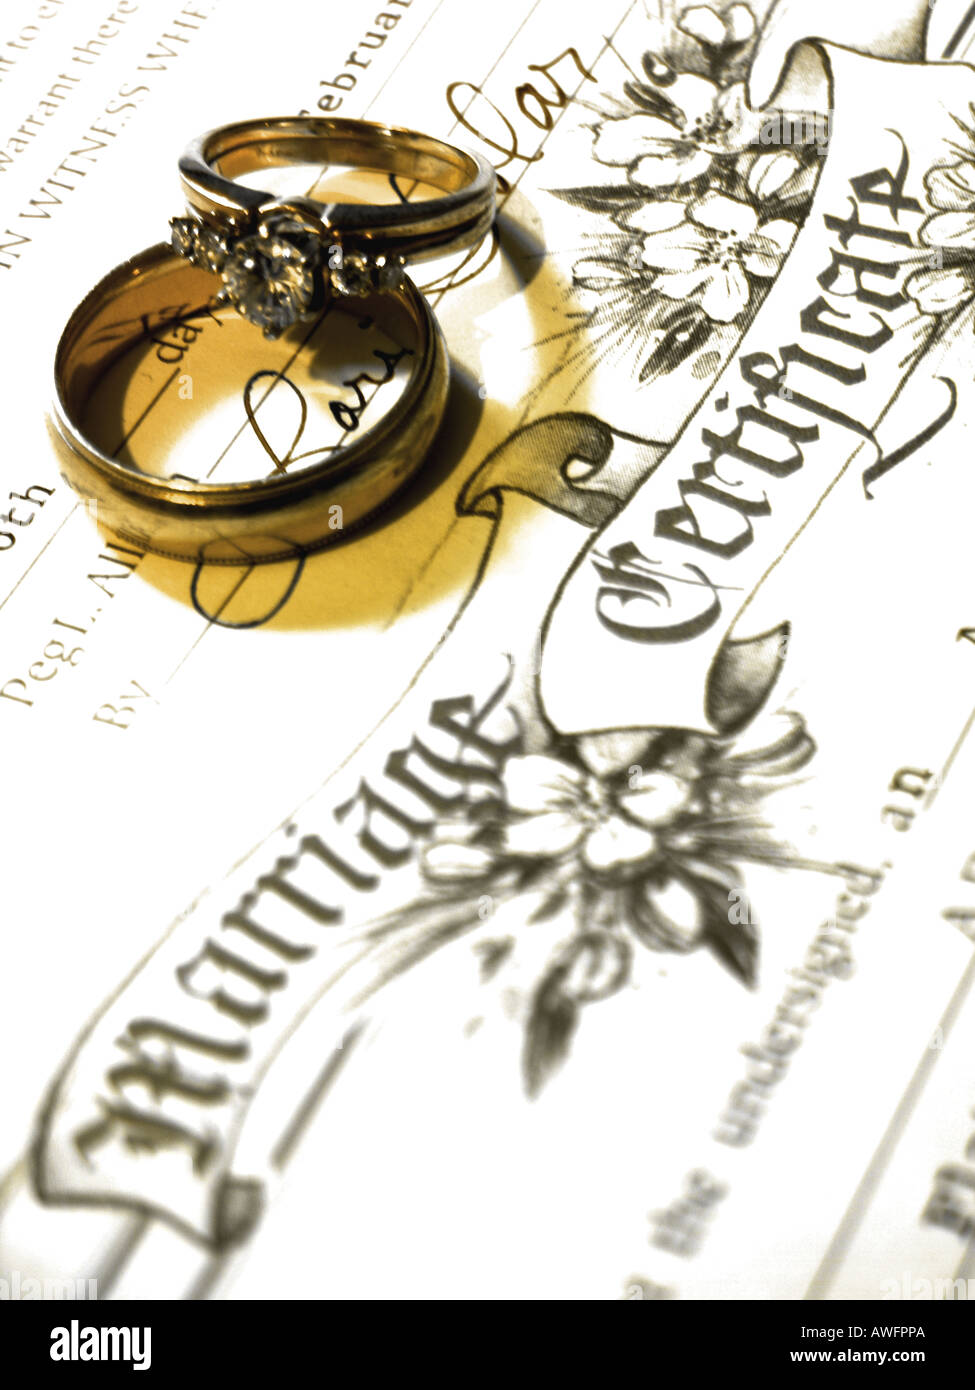 Wedding rings on marriage certificate Stock Photo - Alamy